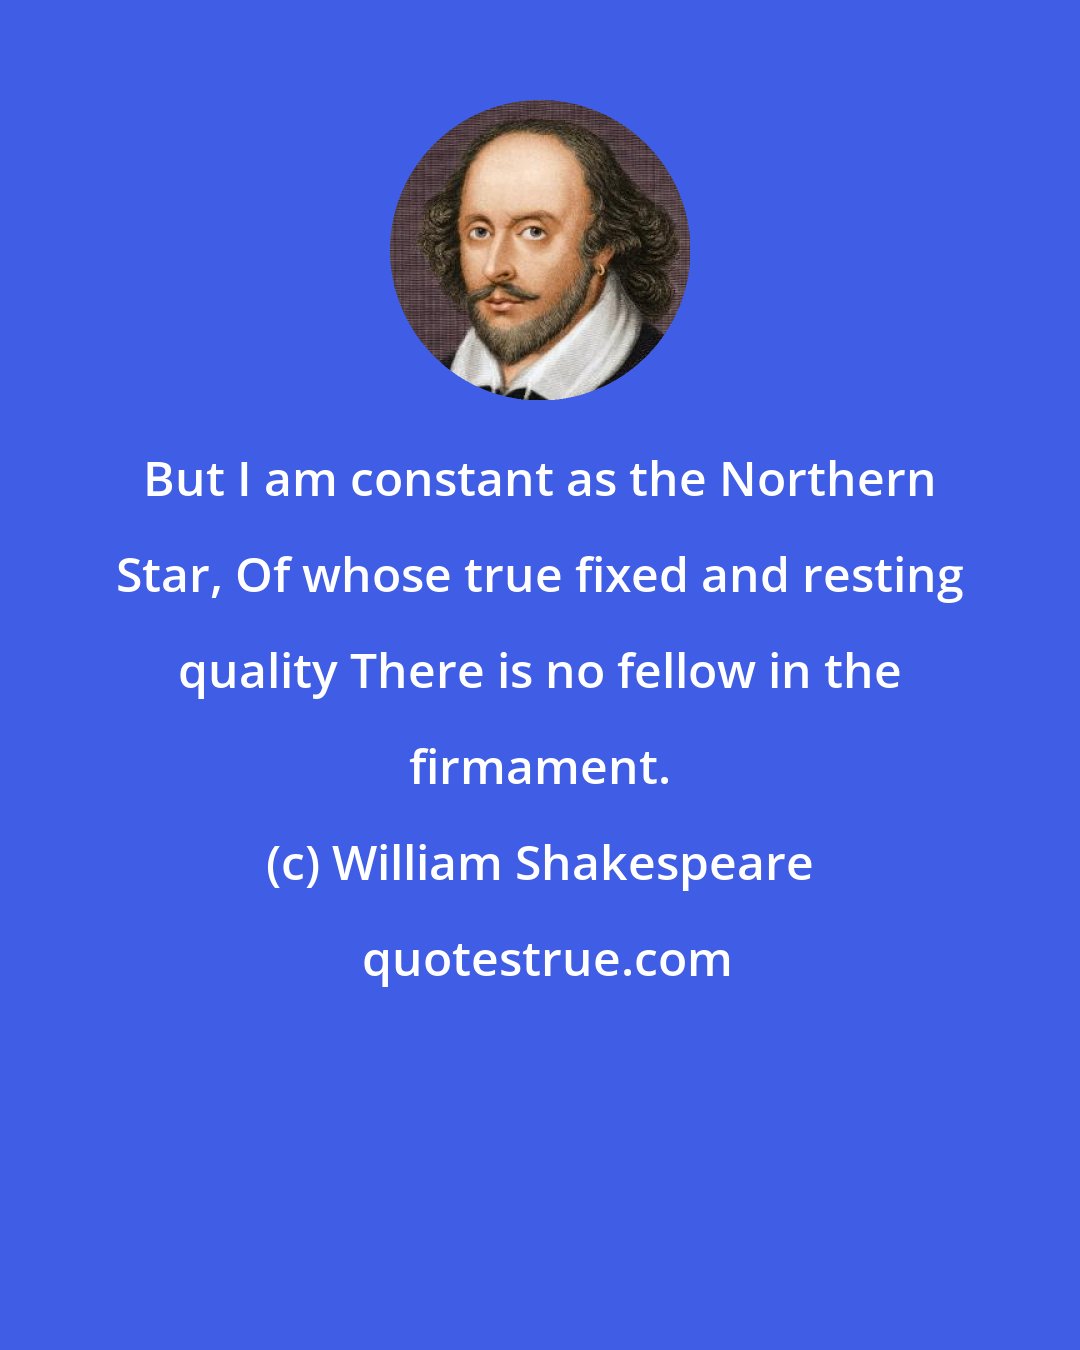 William Shakespeare: But I am constant as the Northern Star, Of whose true fixed and resting quality There is no fellow in the firmament.